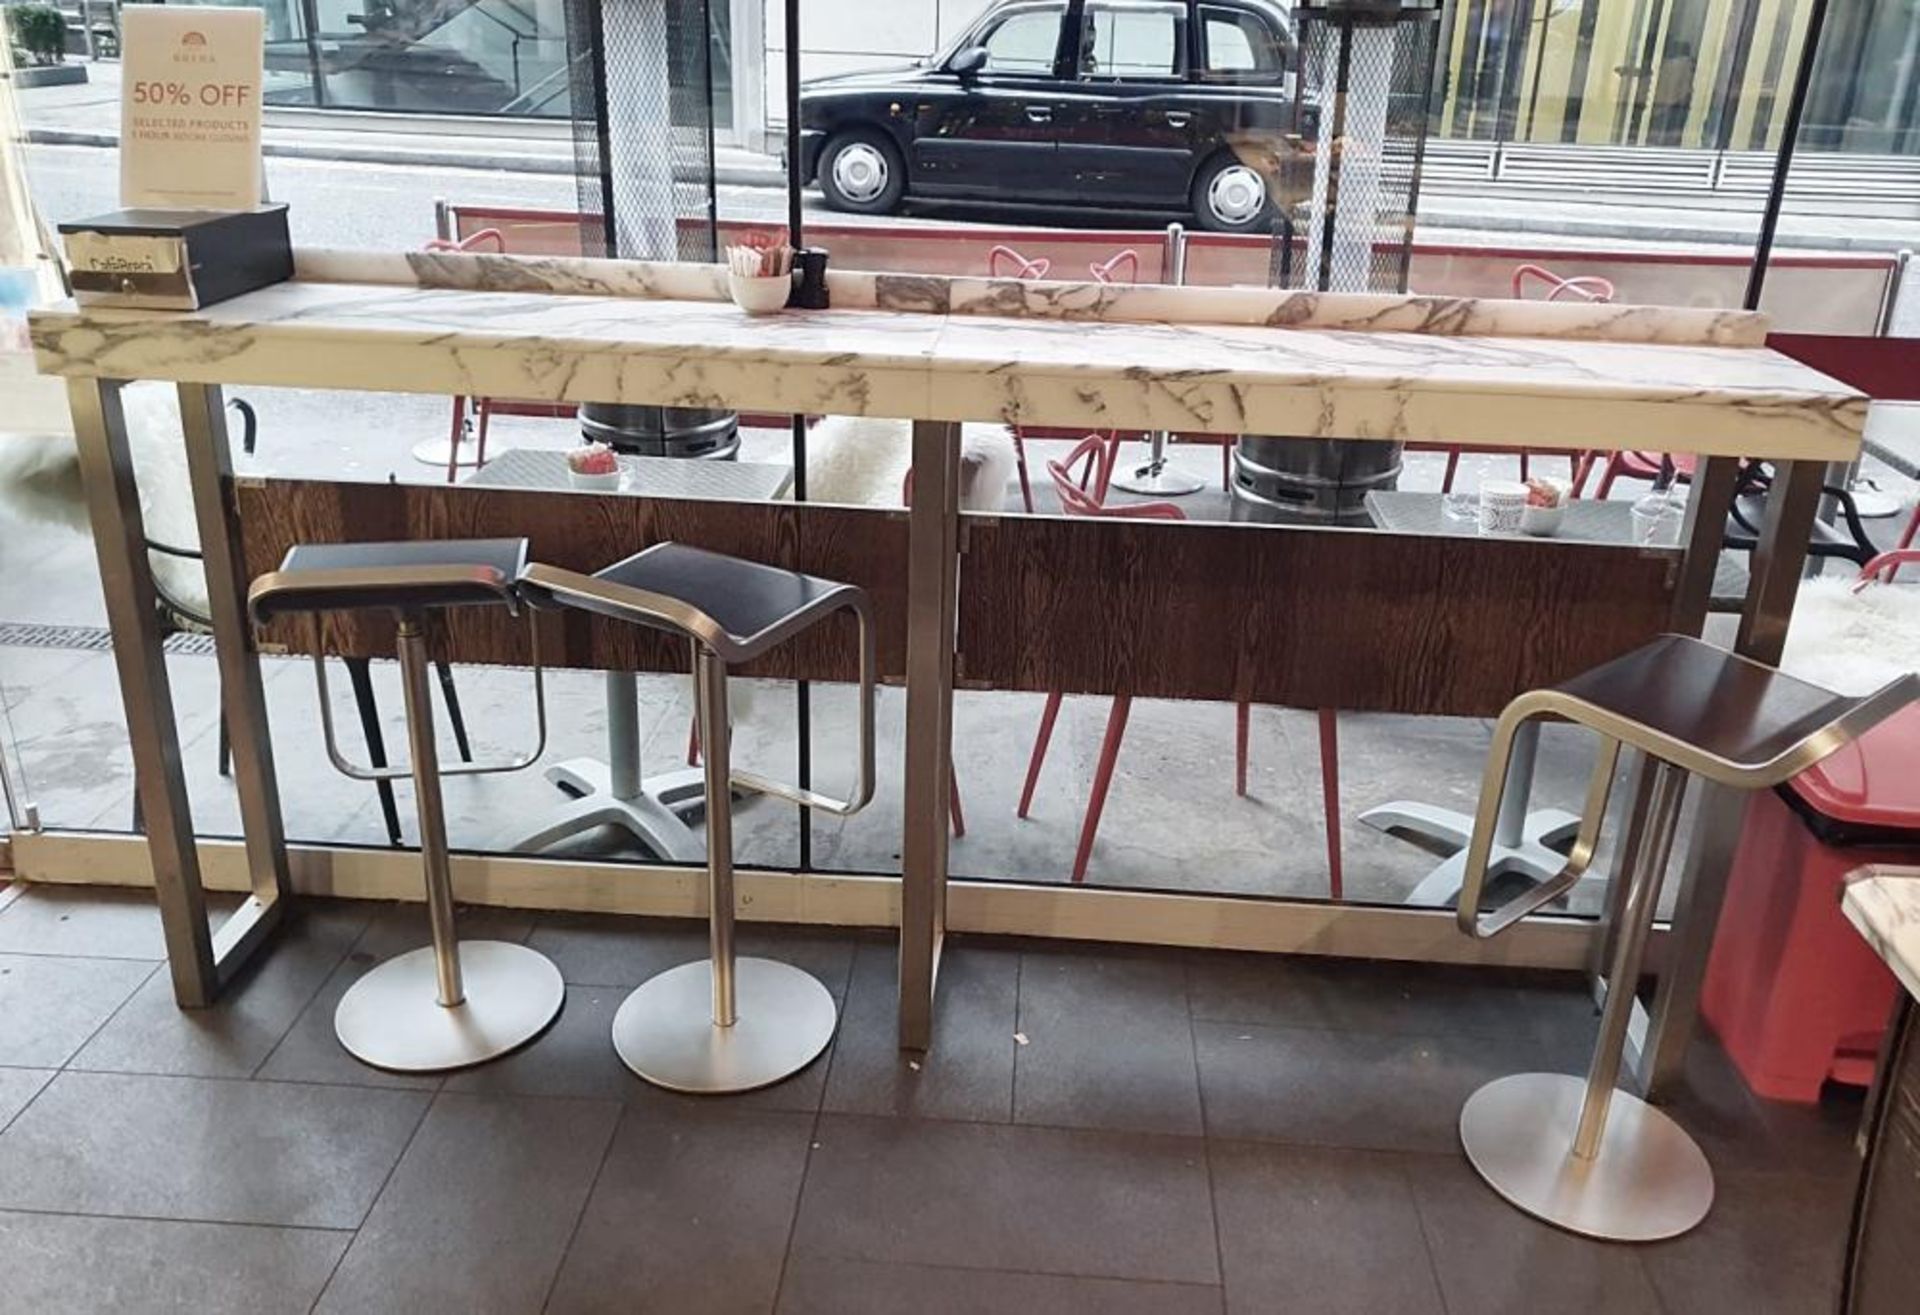 1 x White Marble/Granite Breakfast / Coffee Bar - Two Piece - From A Milan-style City Centre Cafe - Image 2 of 4